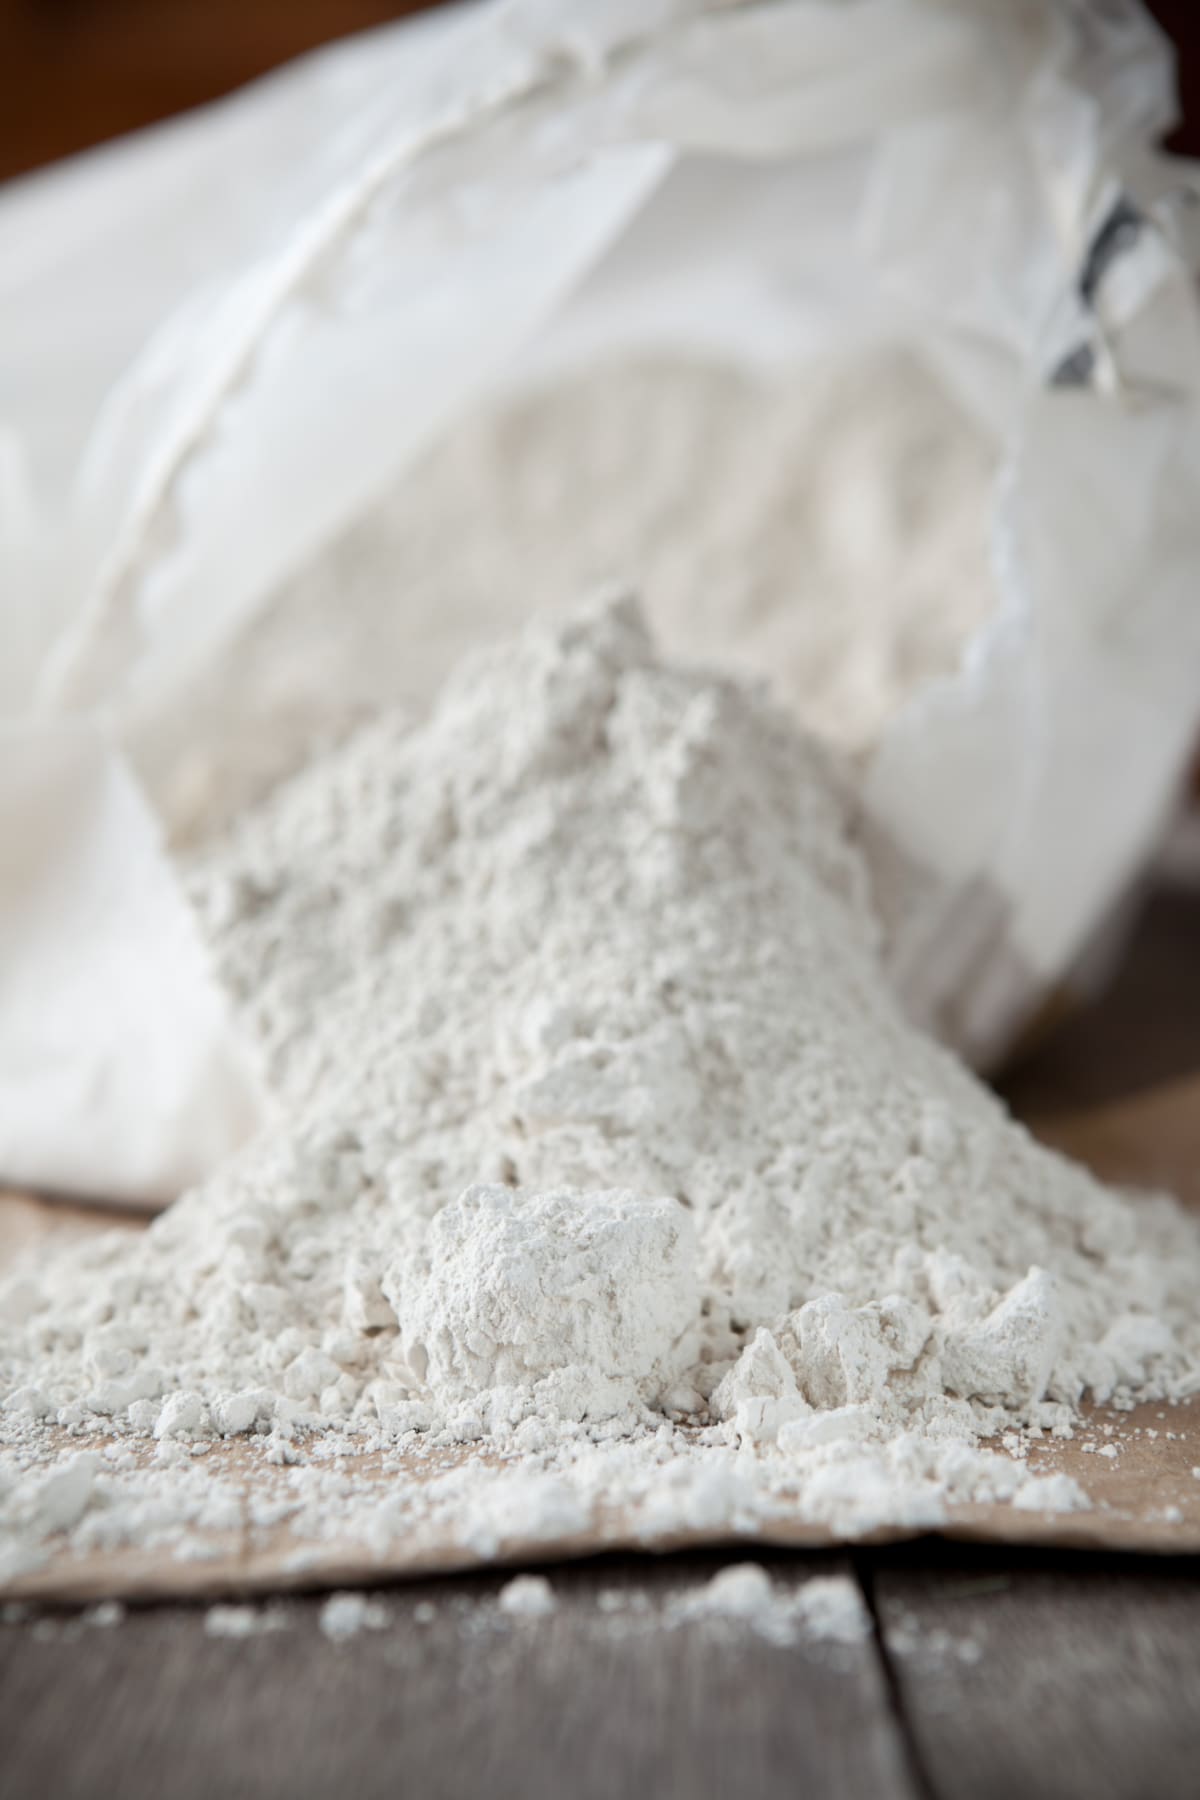 Diatomaceous earth spilling out of a bag